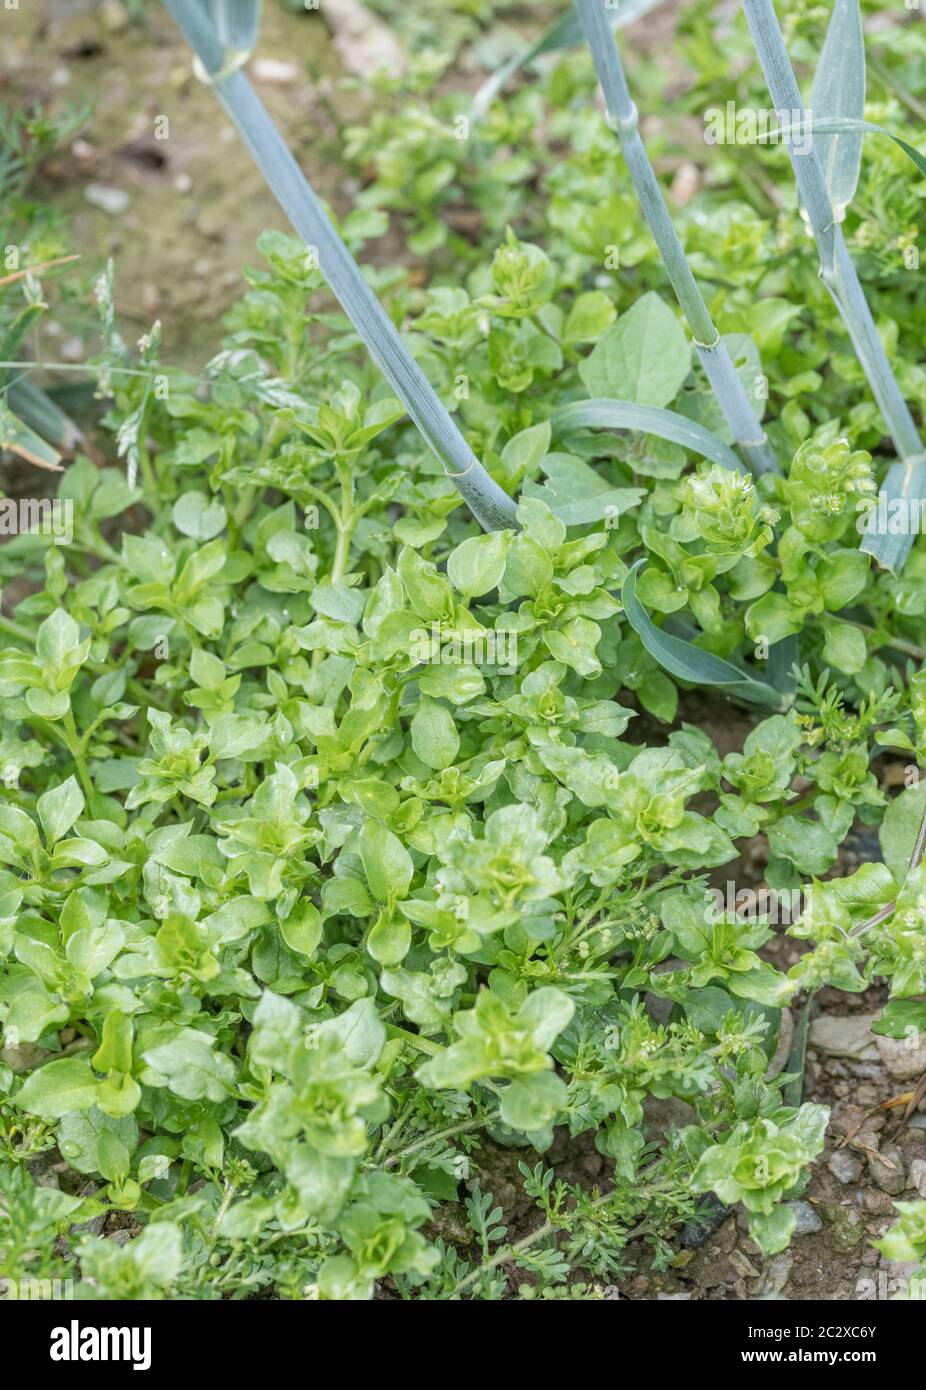 Clump of the agricultural weed Chickweed / Stellaria media growing among stalks of Wheat in a cropped field. Common weeds UK, edible weeds. Stock Photo